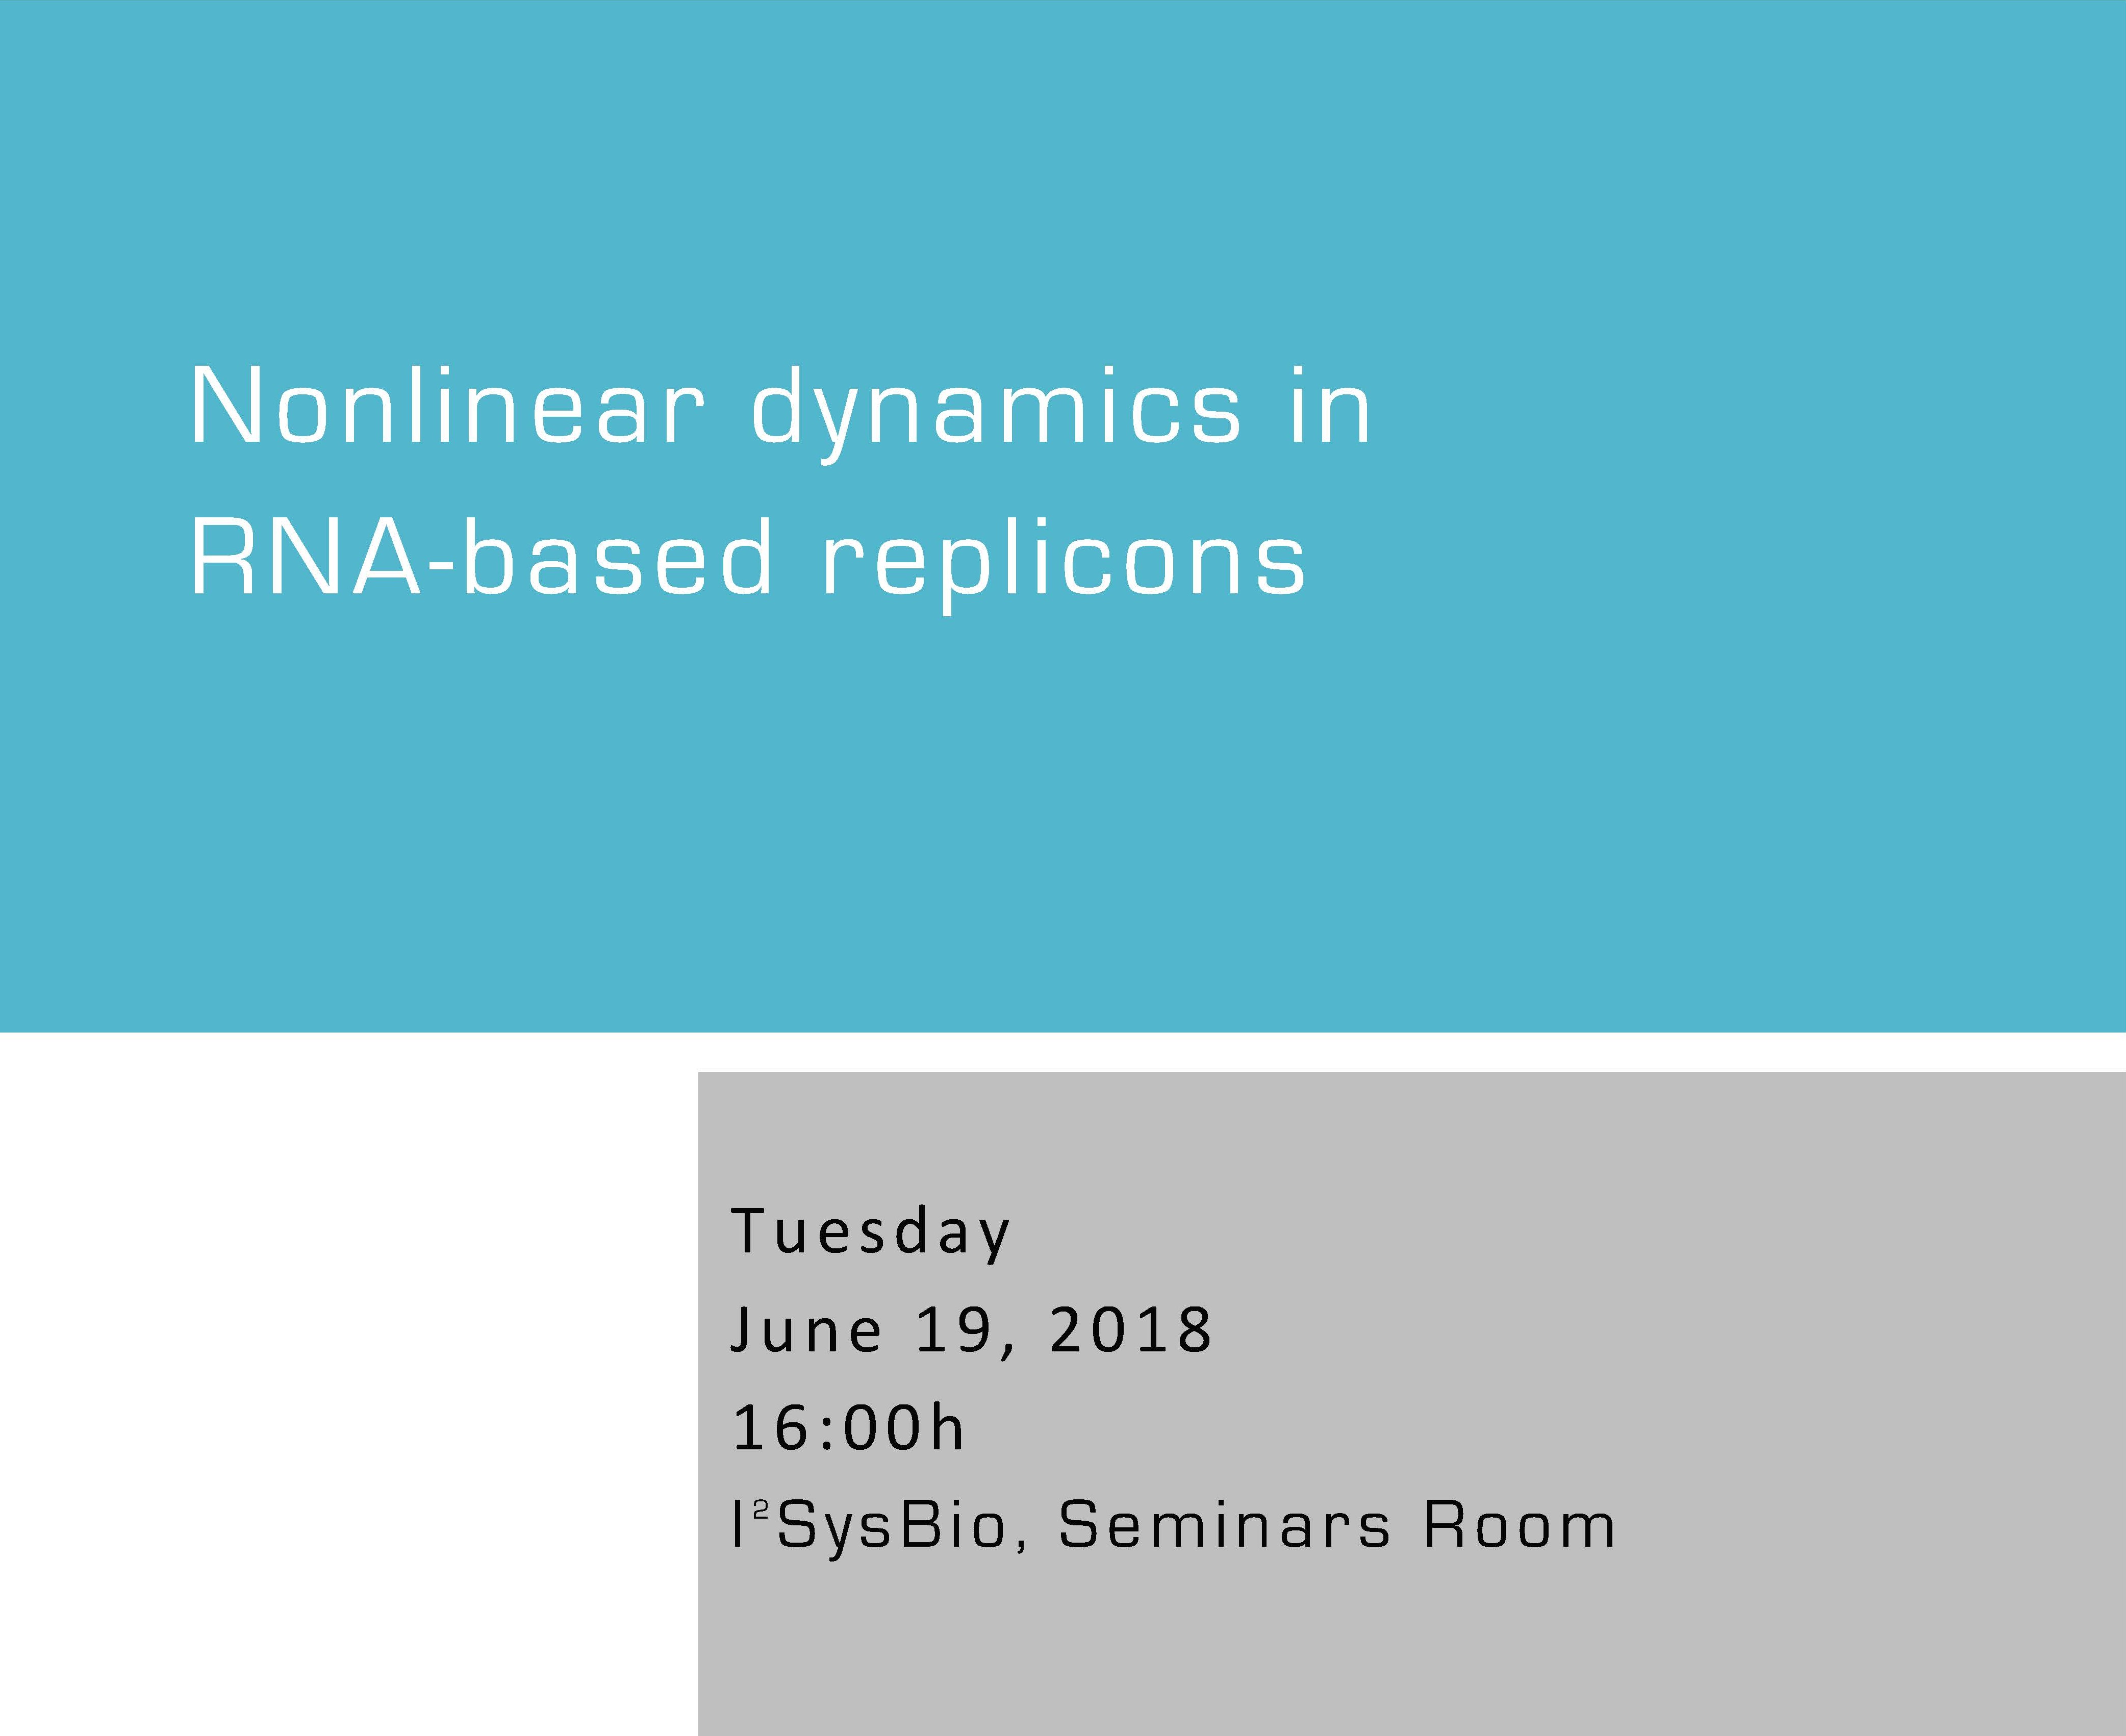 Nonlinear dynamics in RNA-based replicons